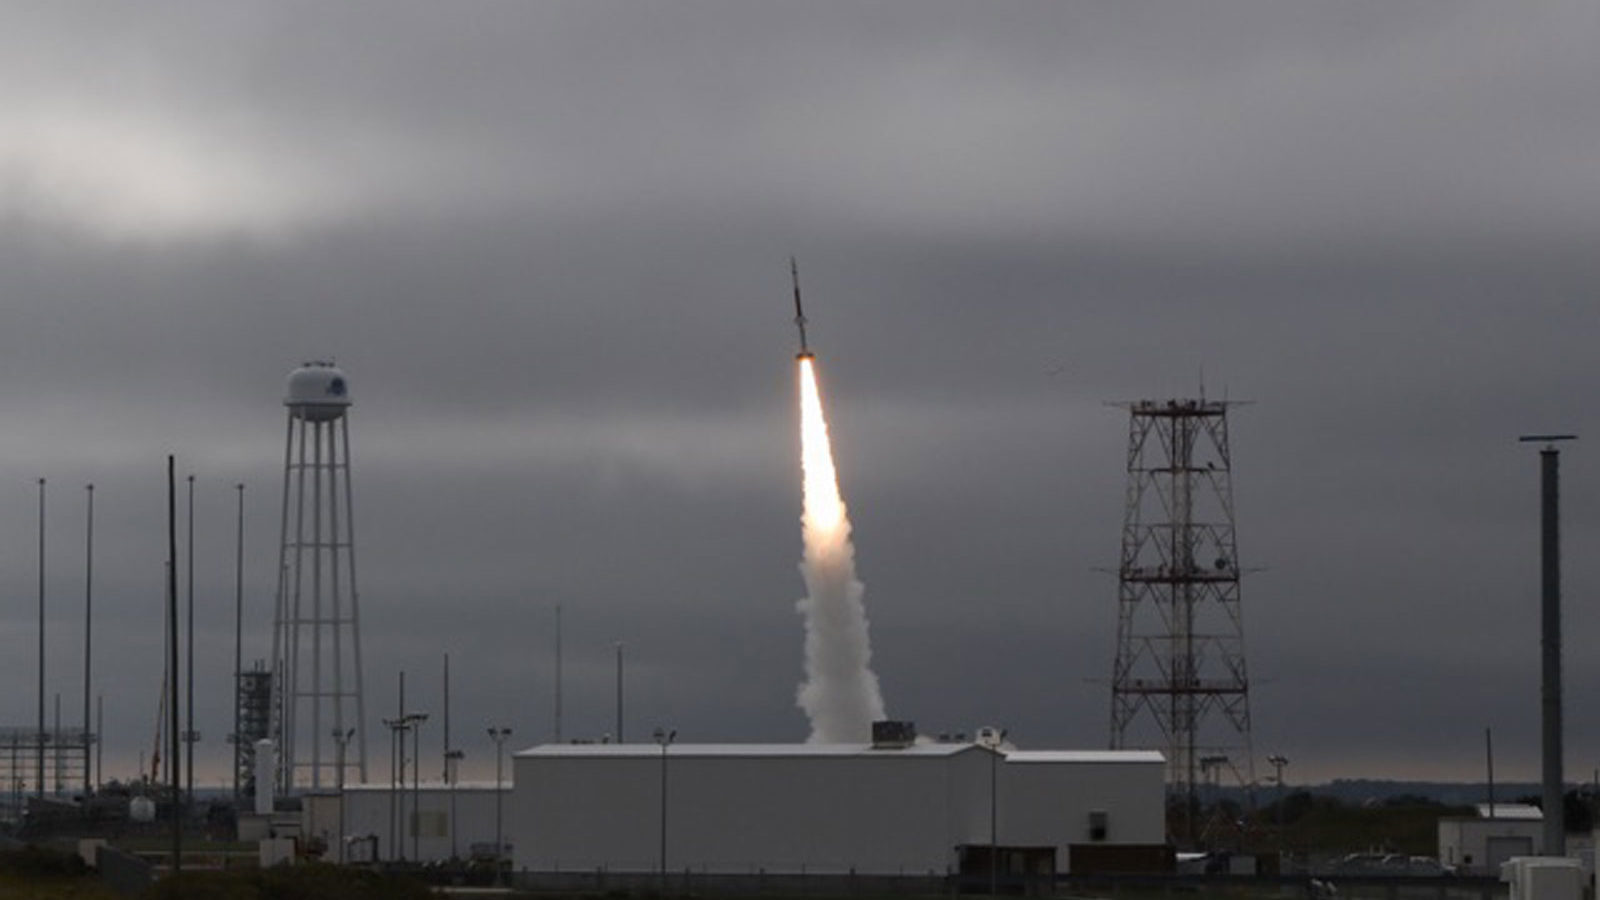 The US military conducted a successful test launch of a rocket with components for hypersonic weapo...